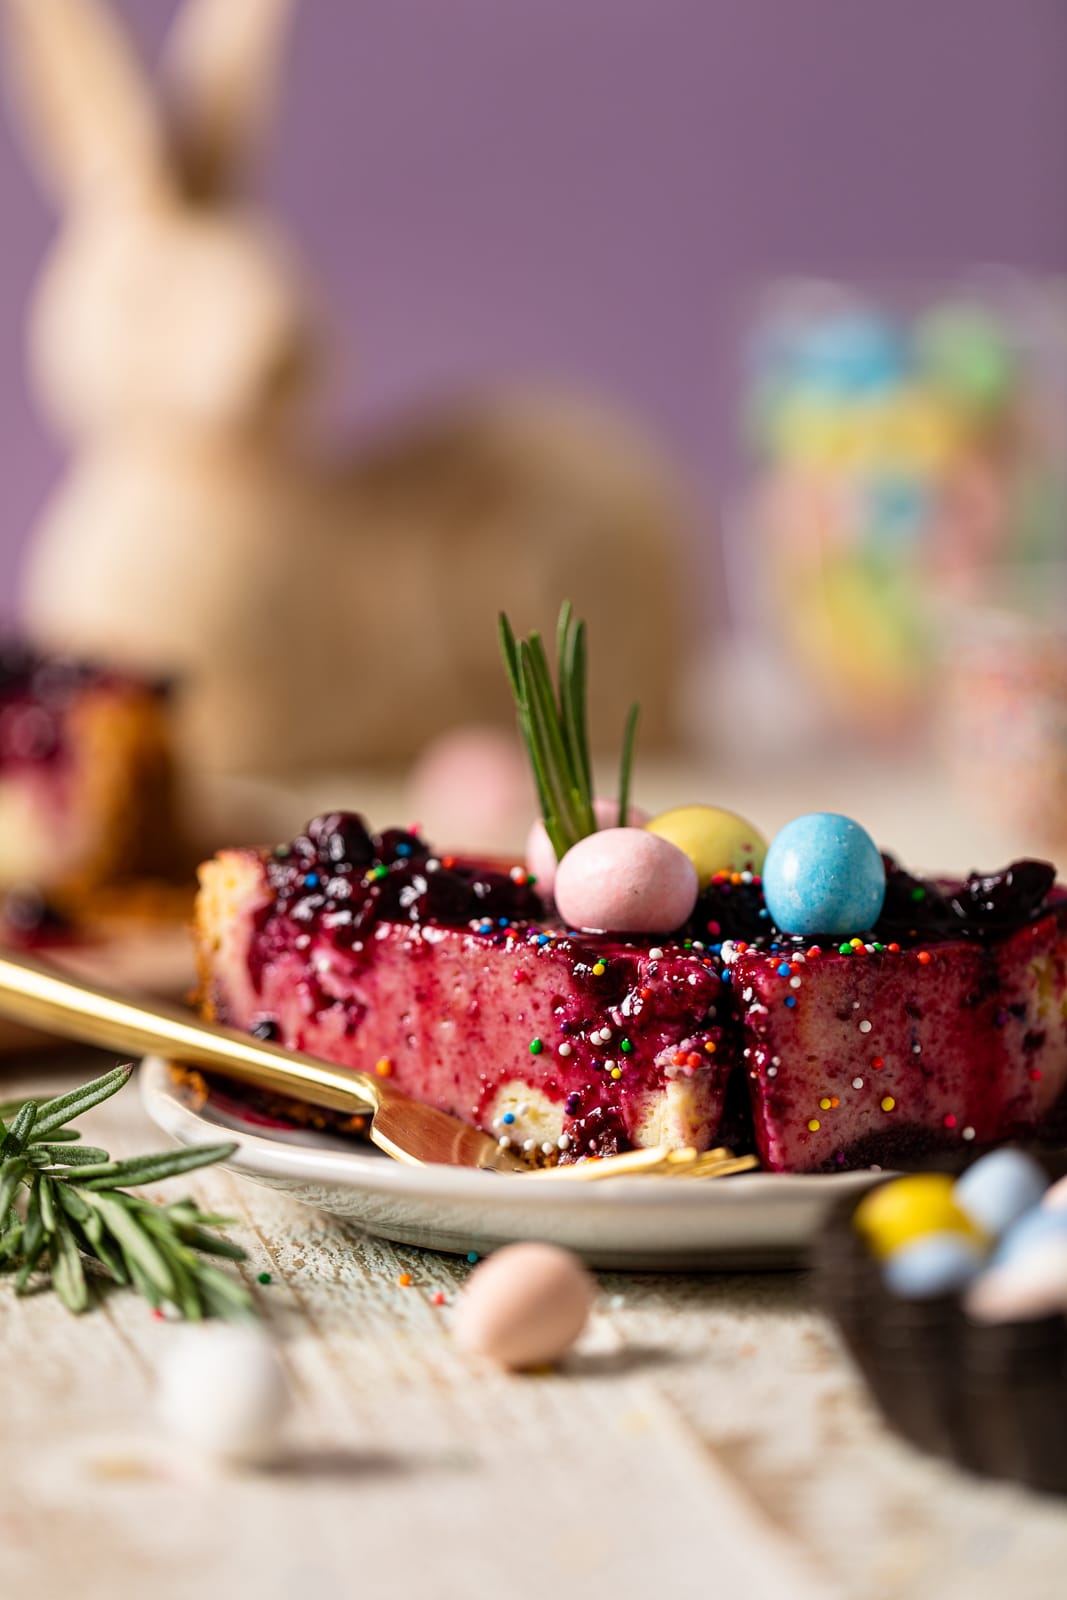 Slice of Lemon Blueberry Cheesecake topped with pastel Easter egg candies